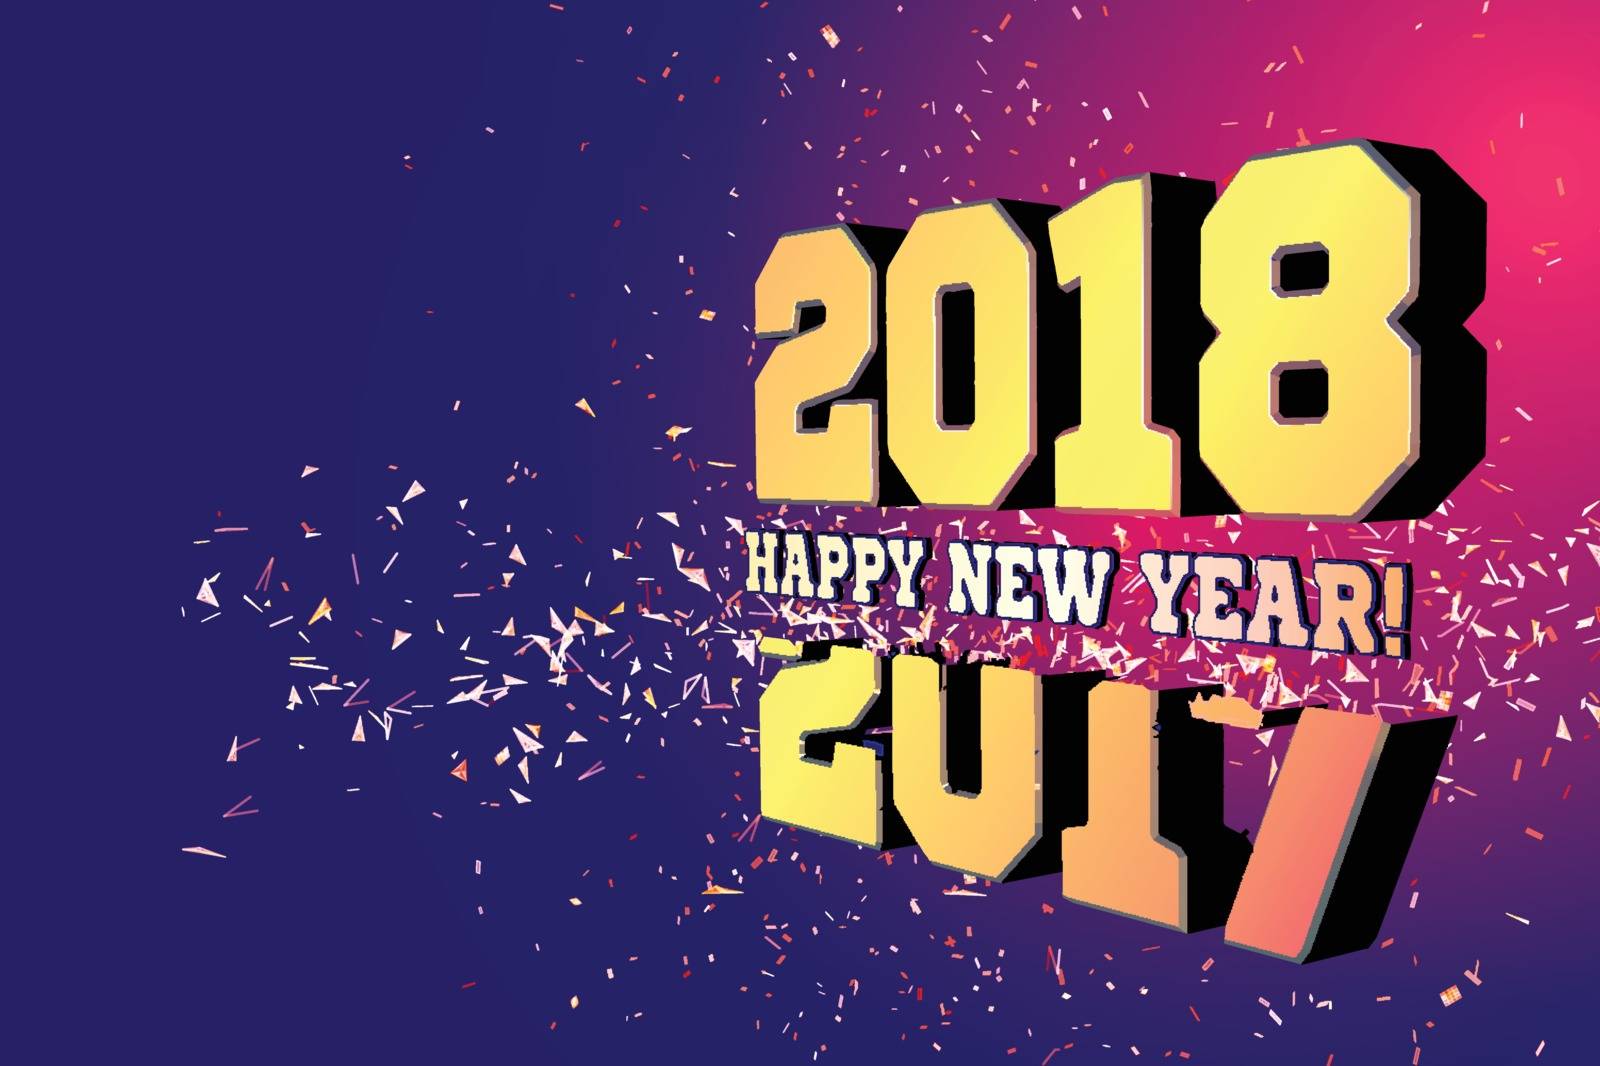 Congratulations on the New Year 2018, which goes after 2017. Vector New Year's numbers with particles flying away from the explosion. by sermax55